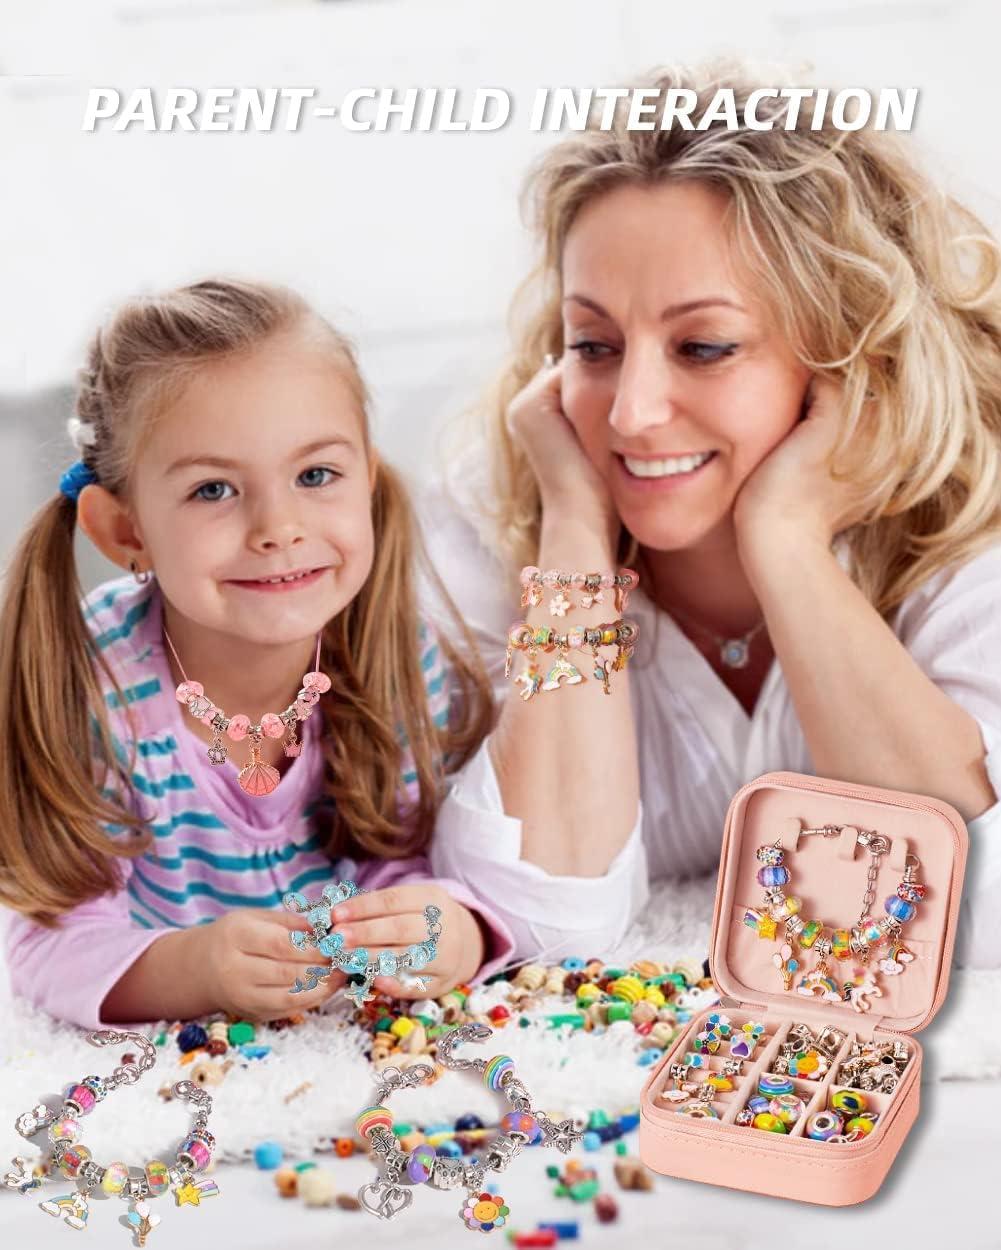 Jewelry Making Kits & Supplies That Make Great Gifts